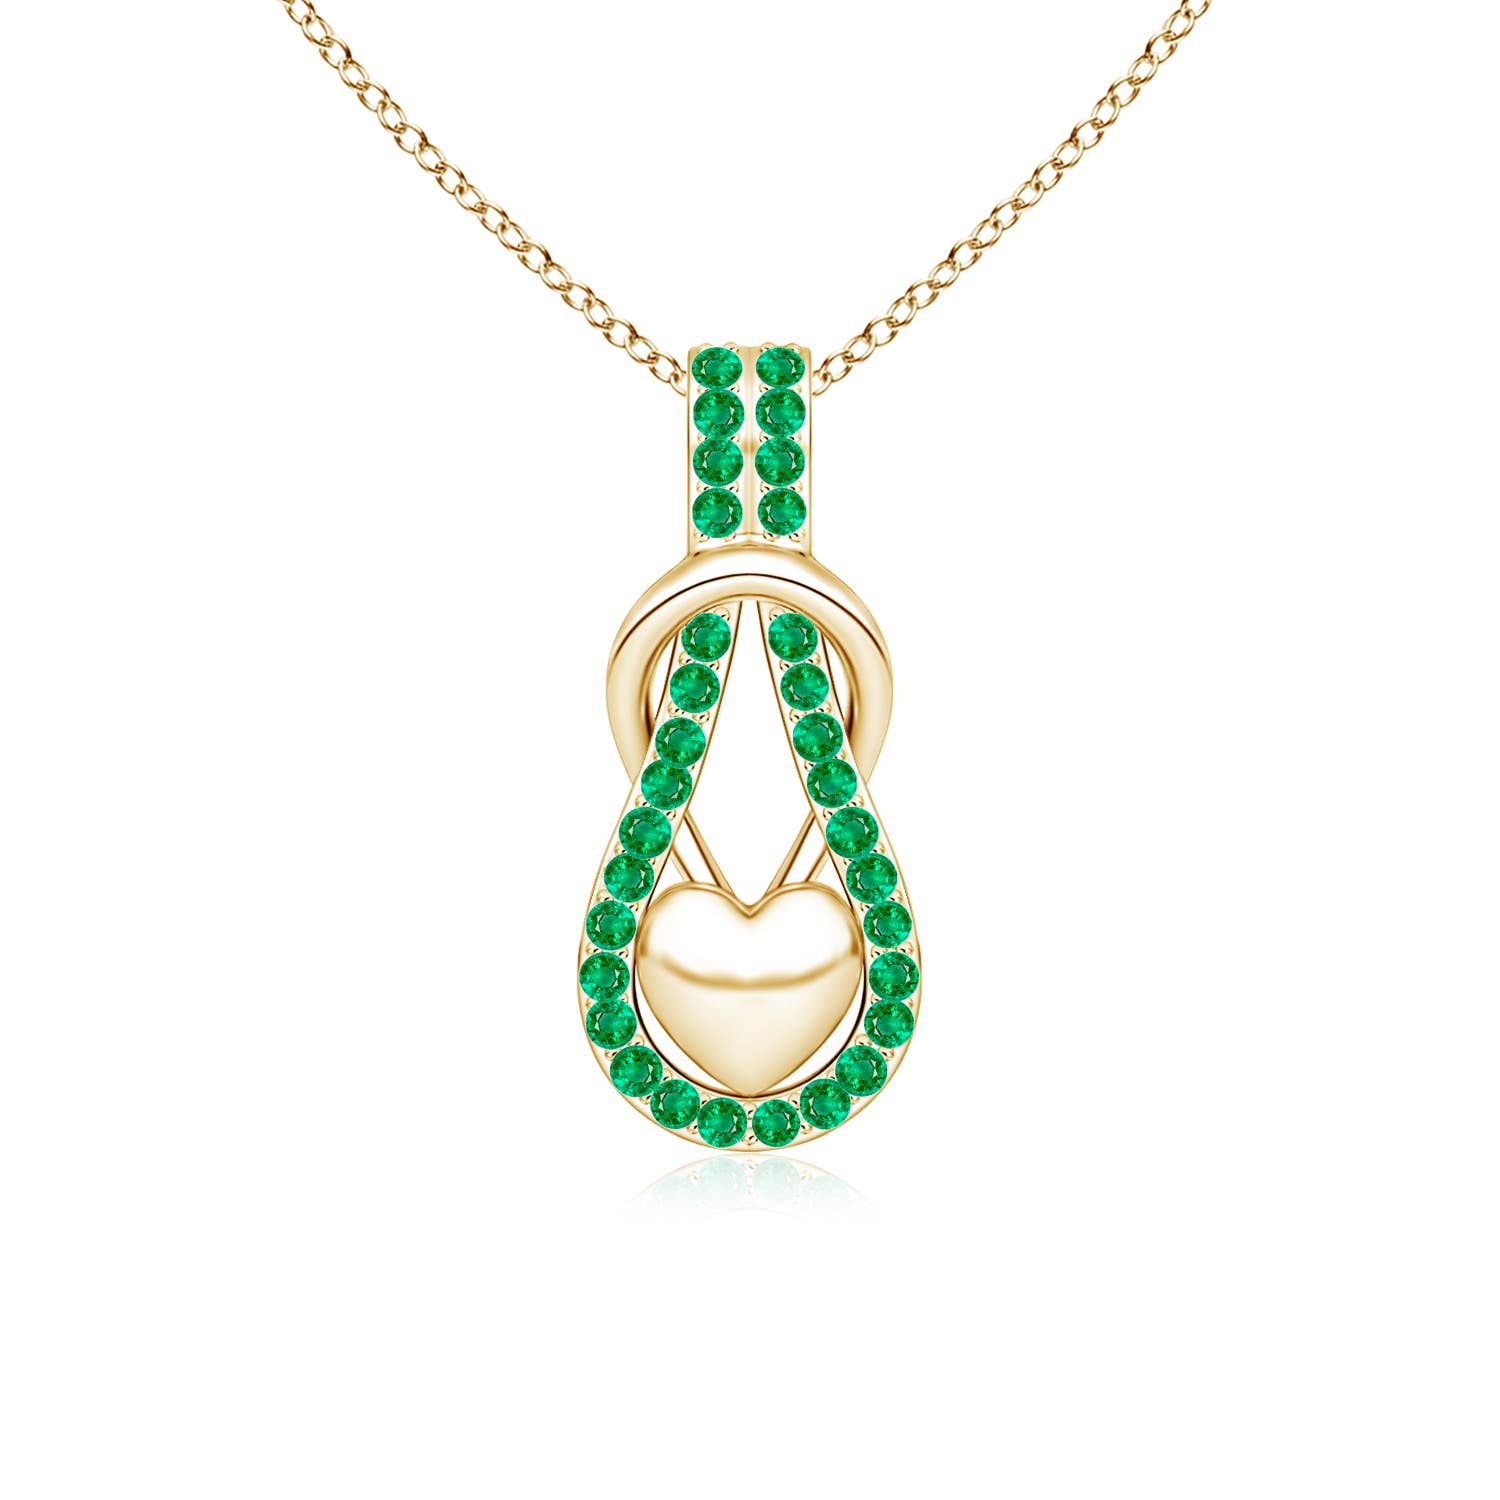 AAA - Emerald / 0.48 CT / 14 KT Yellow Gold